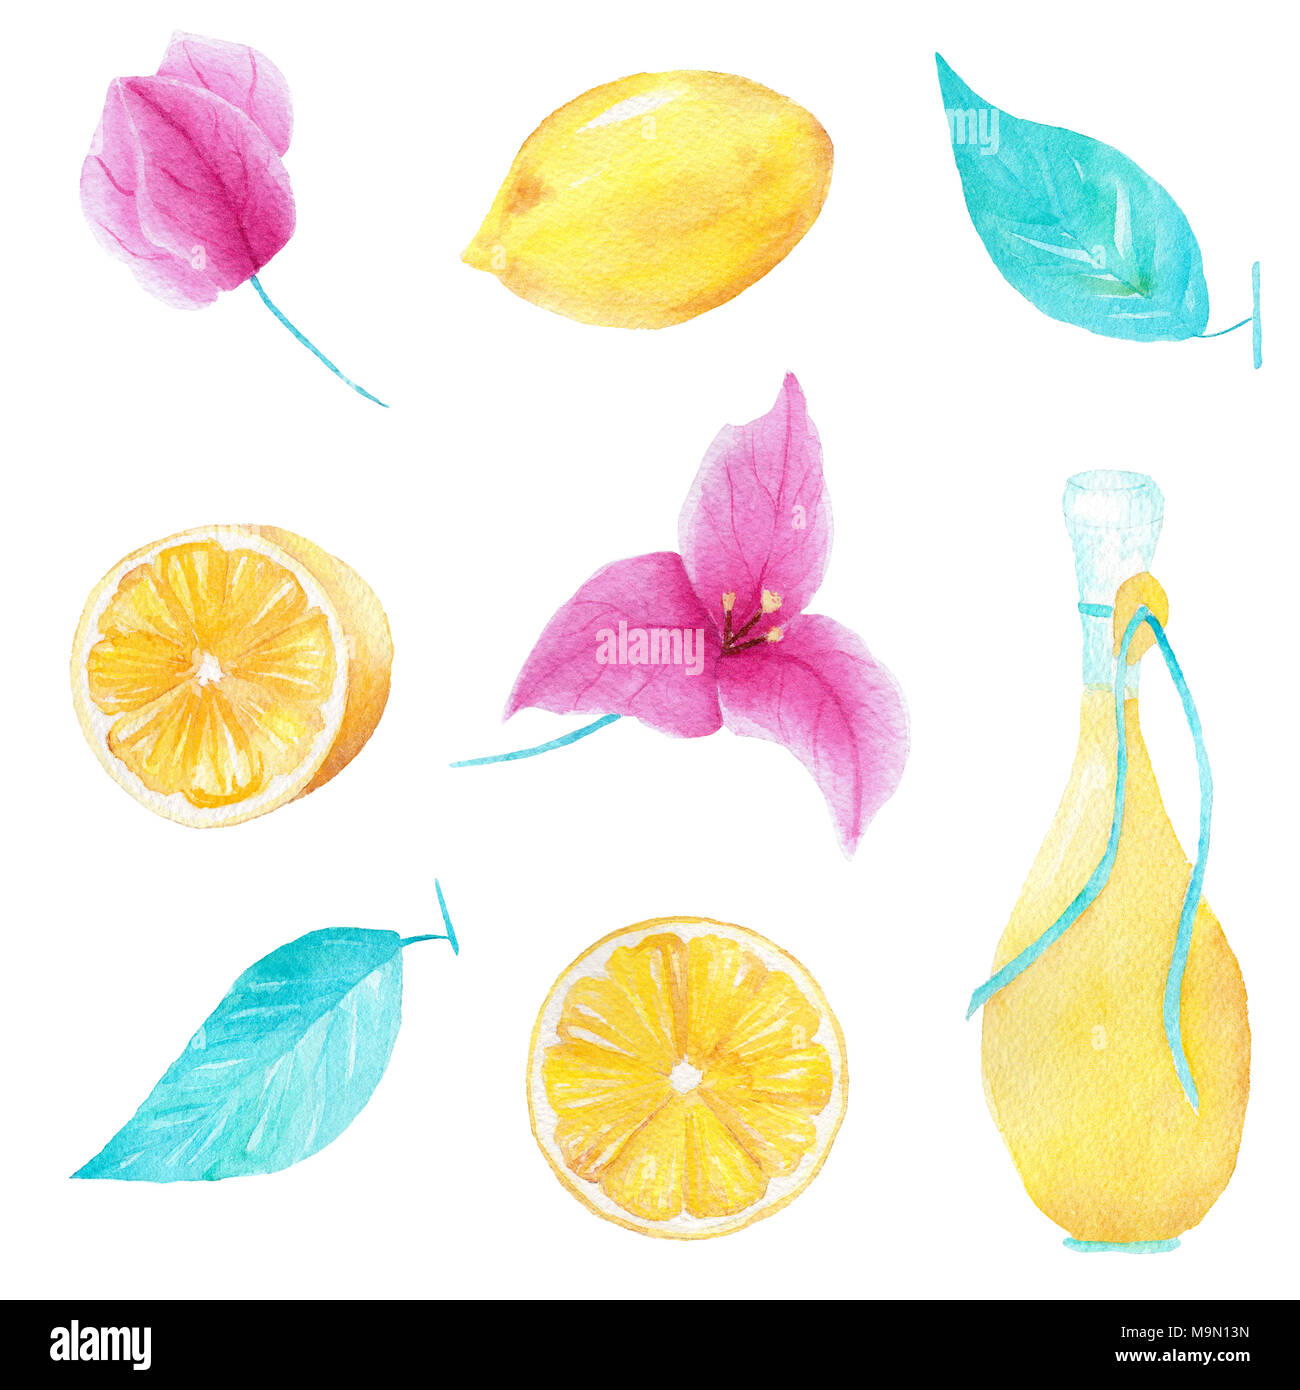 Watercolor handmade set of lemon, olive oil, leaf and bouganvillea flower on white background. Can be used for printing and decoration. Stock Photo